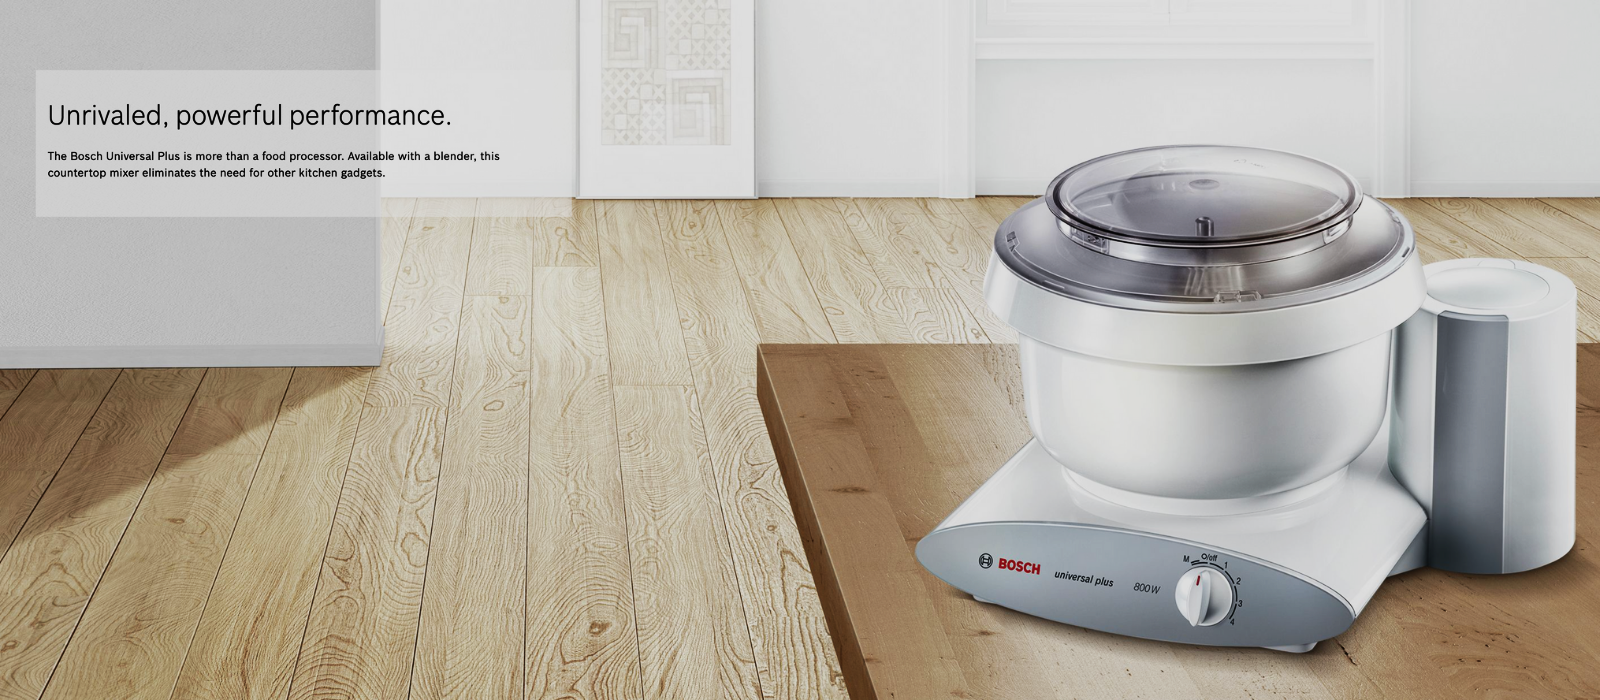 Bosch Universal Plus Kitchen Mixer sitting on a table